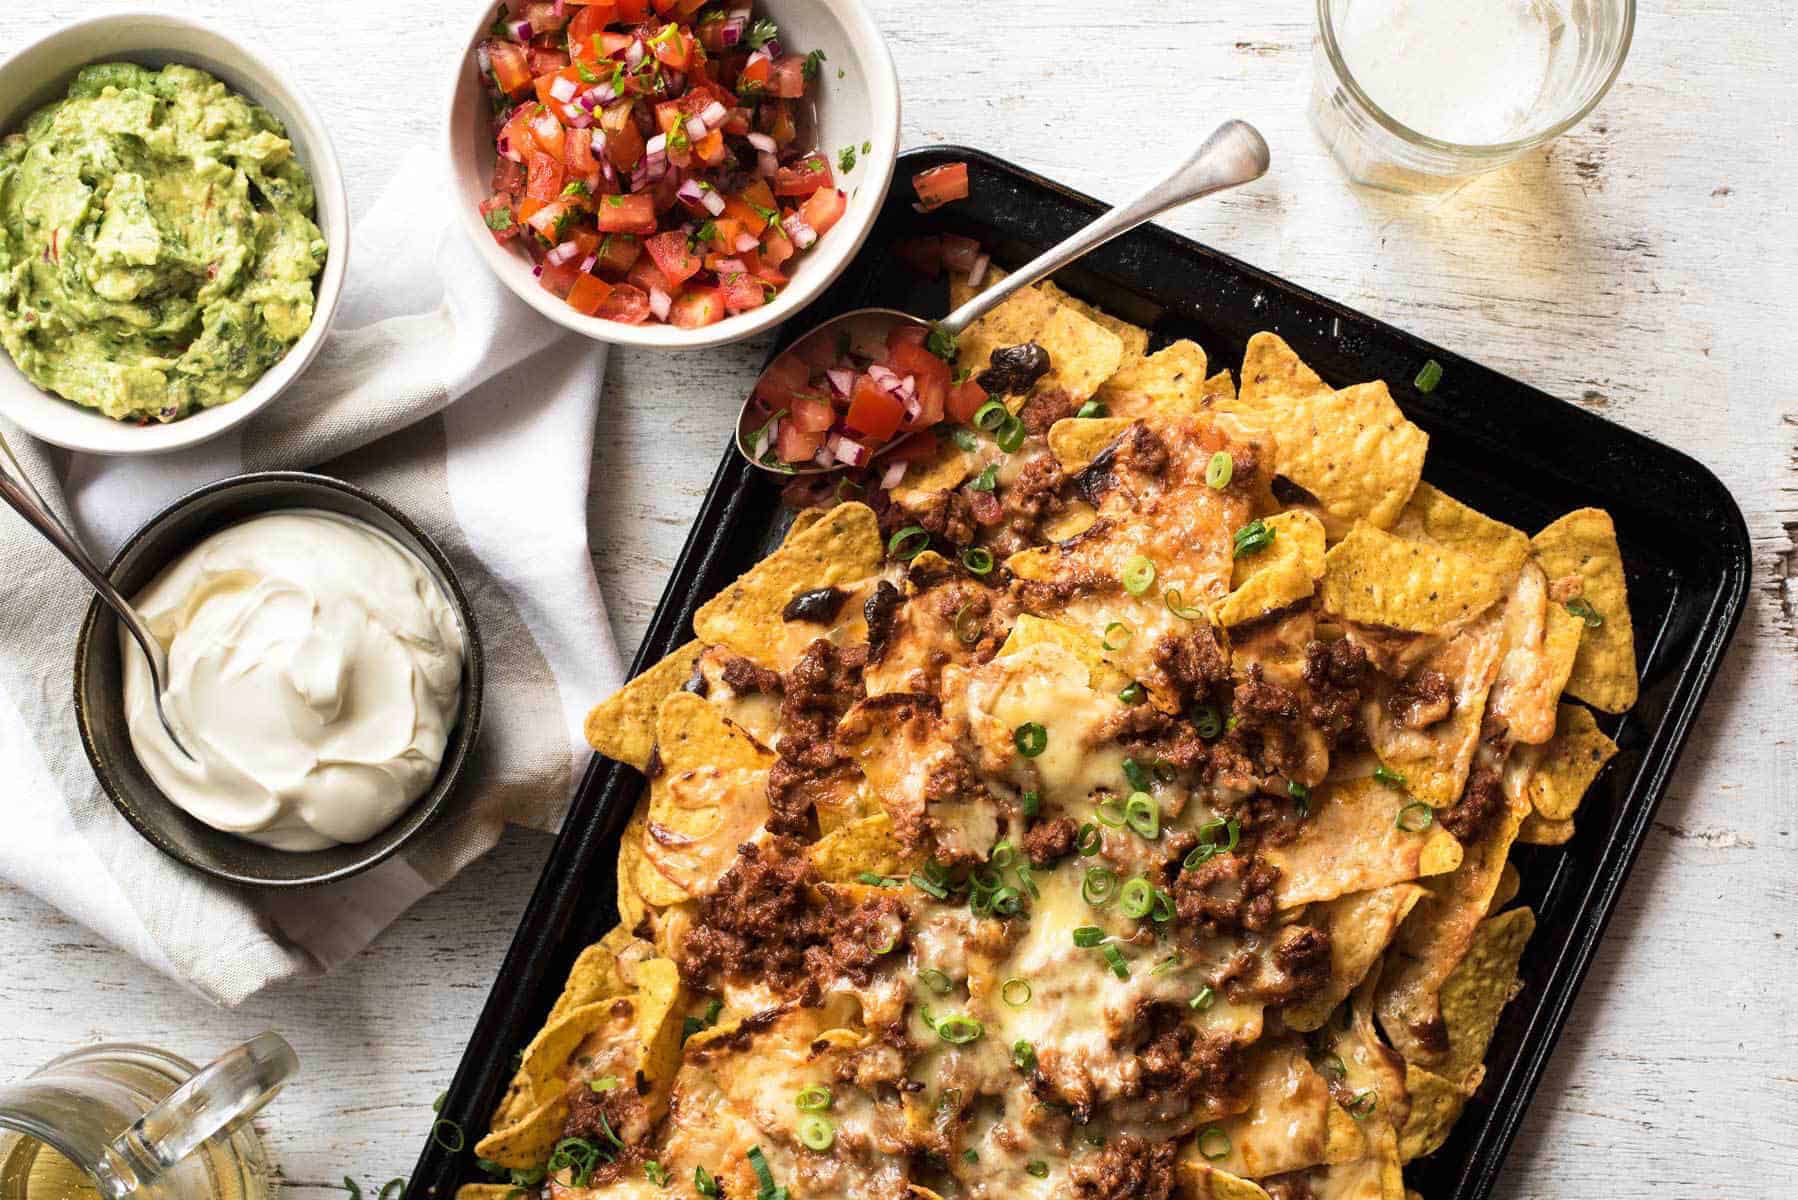 Ripper Beef Nachos - The secret to the ultimate nachos is a 5 ingredient, 5 minute Nachos Cheese sauce!